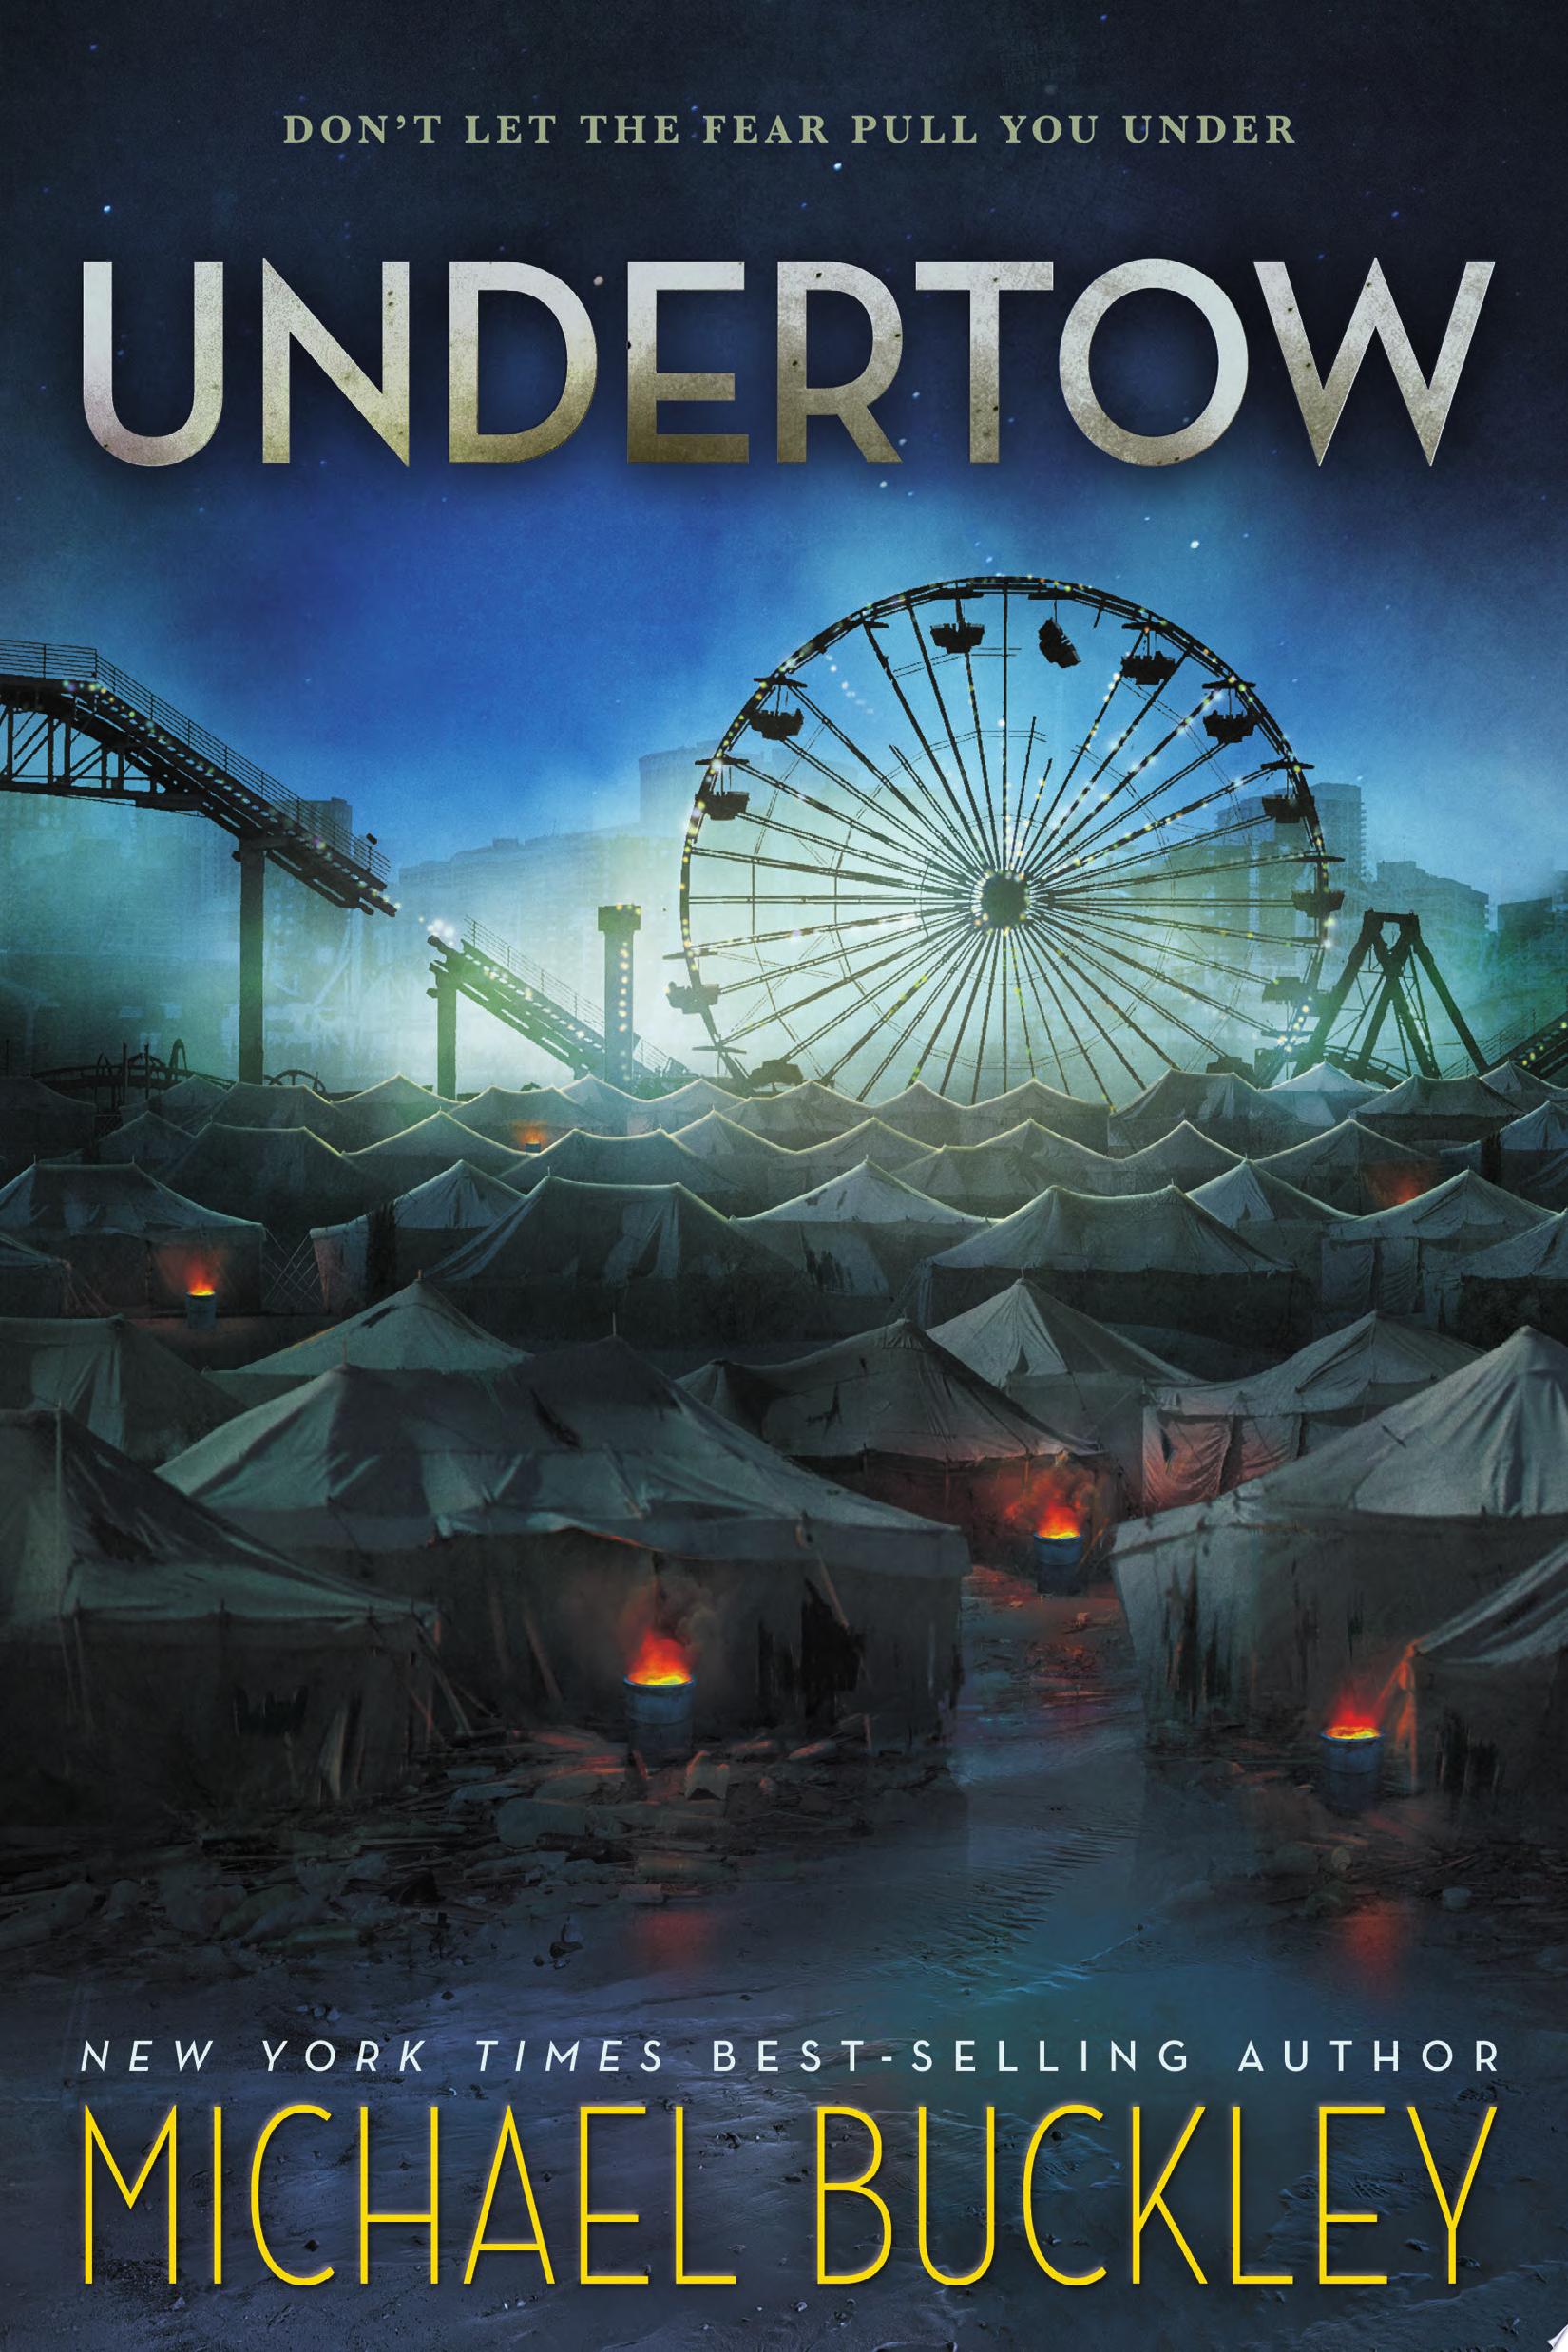 Image for "Undertow"